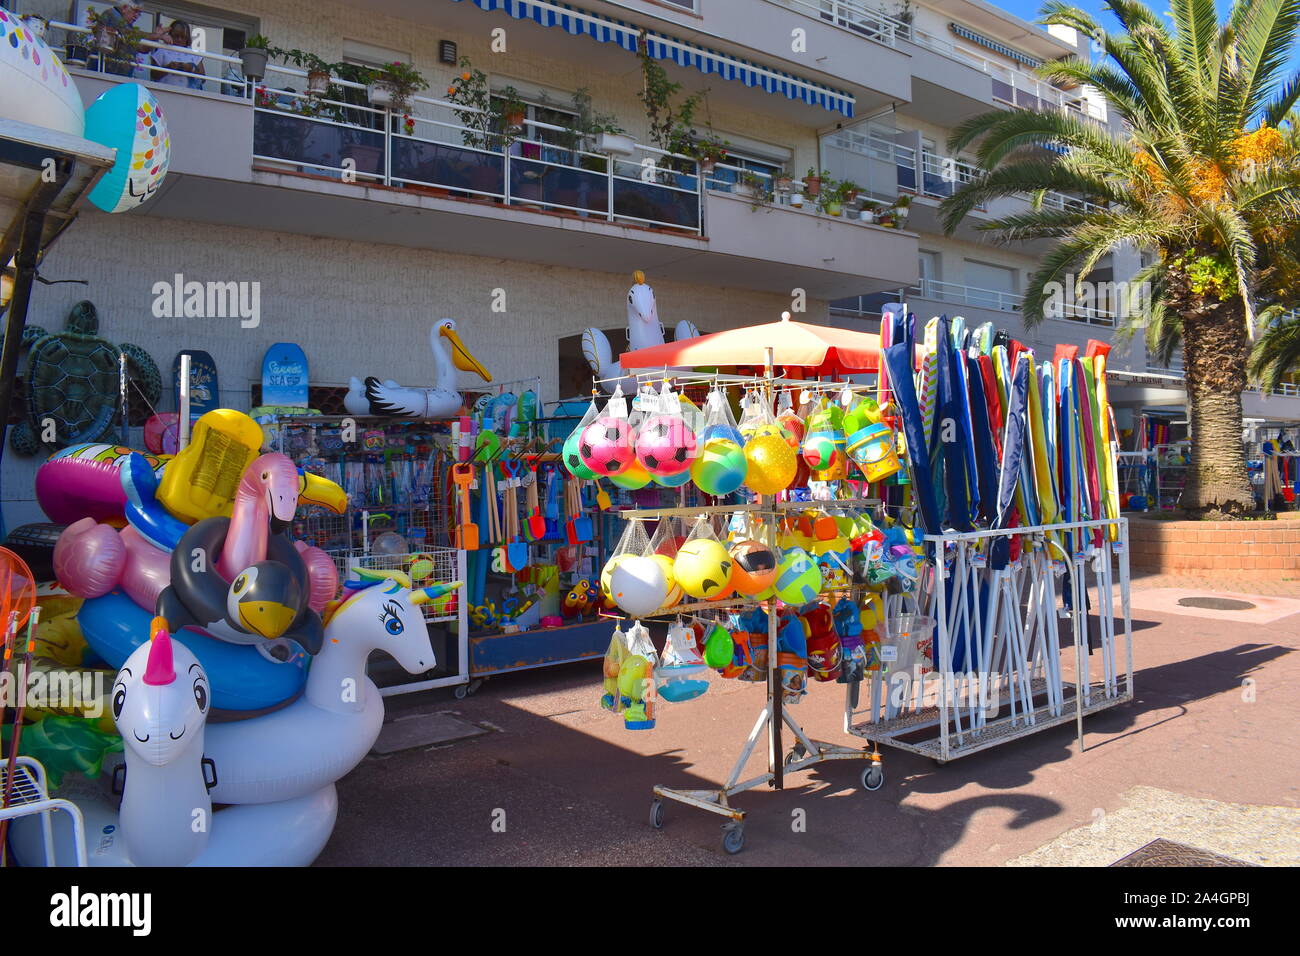 French shop on the promenade selling pool and beach inflatables, games, sets and toys. Palm tree and coastal residential building at the background. Stock Photo